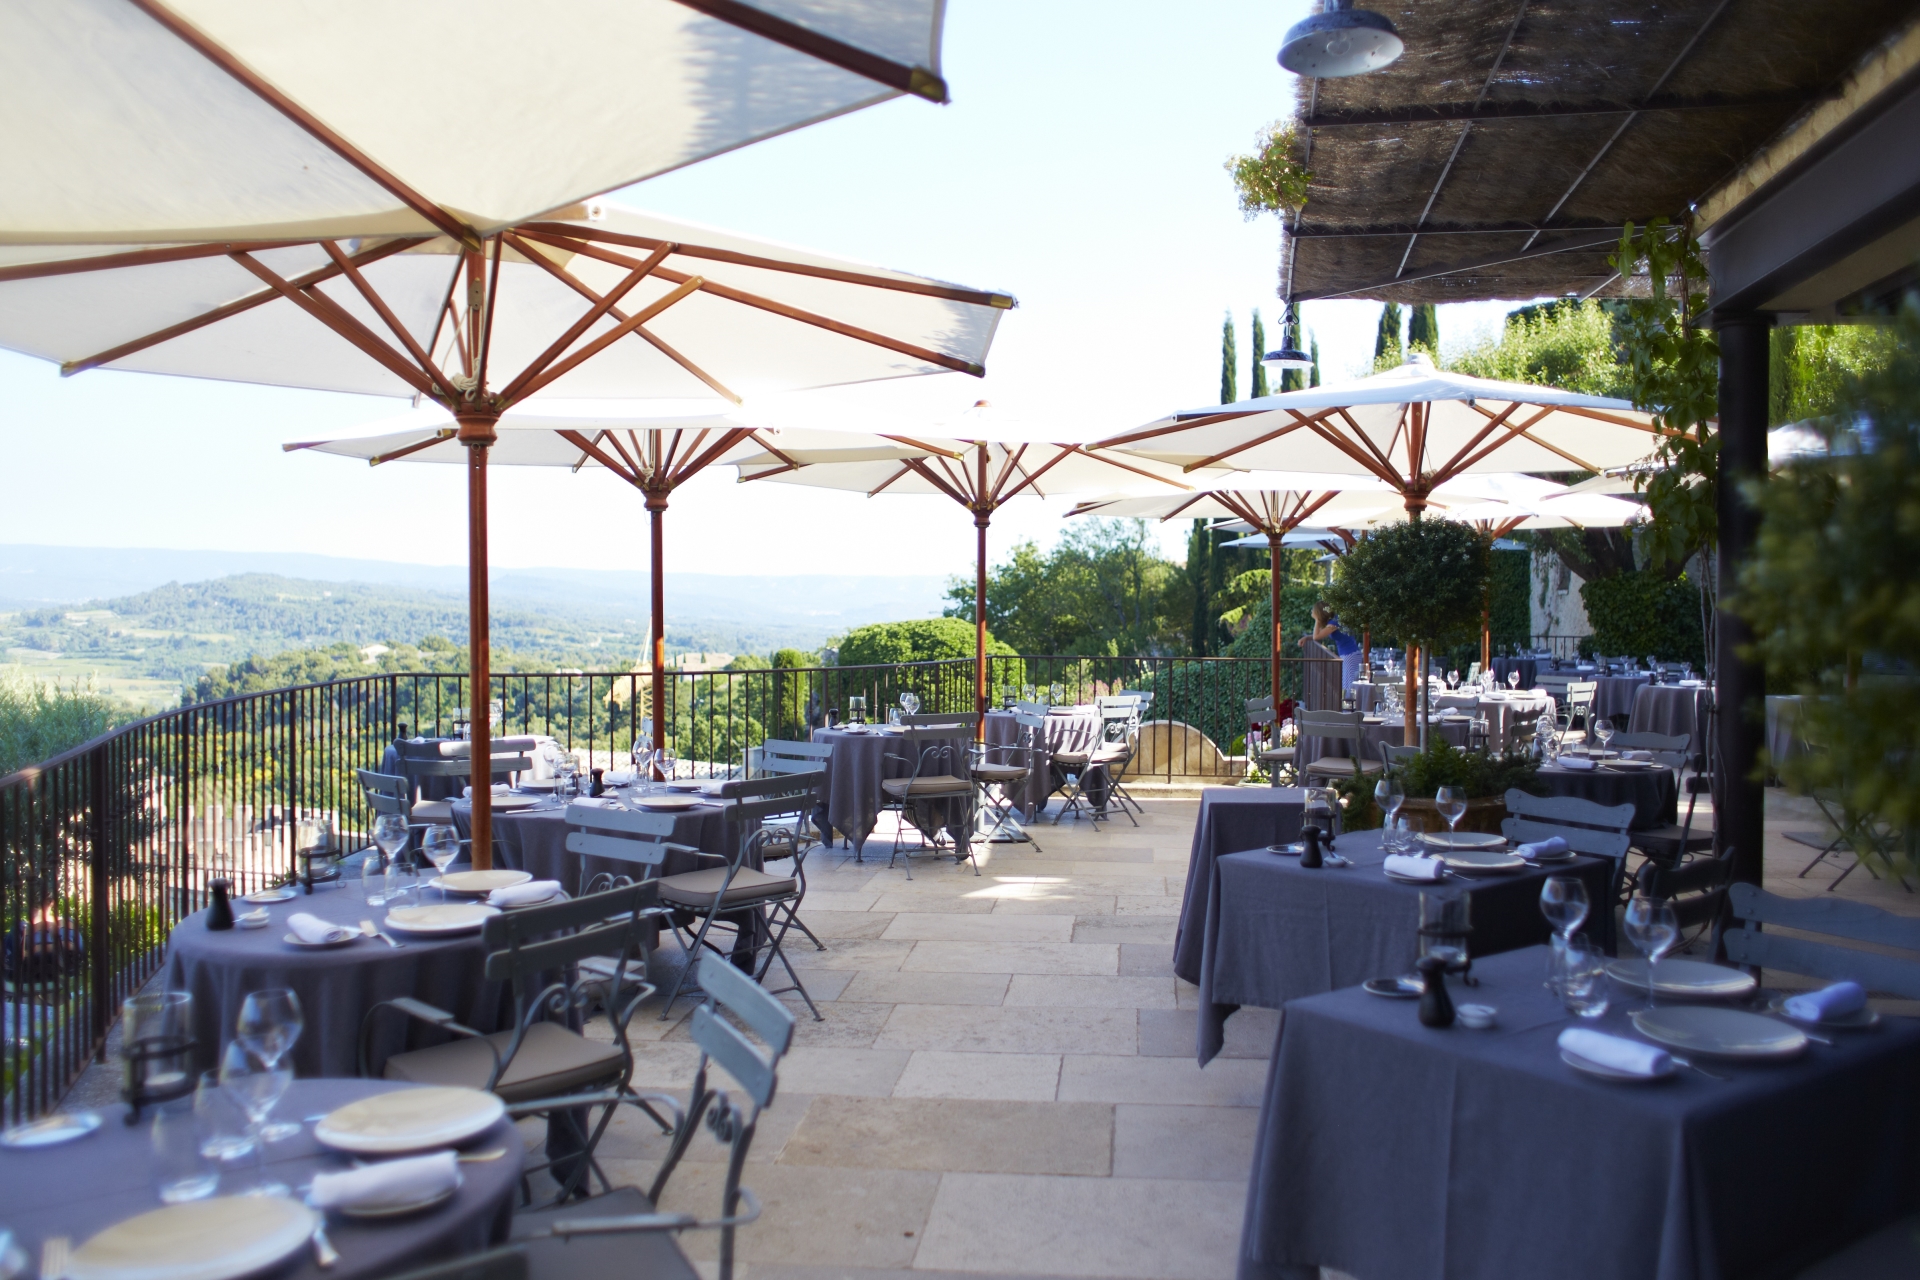 Restaurant terrace at Hotel Crillon le Brave - The South of France in style